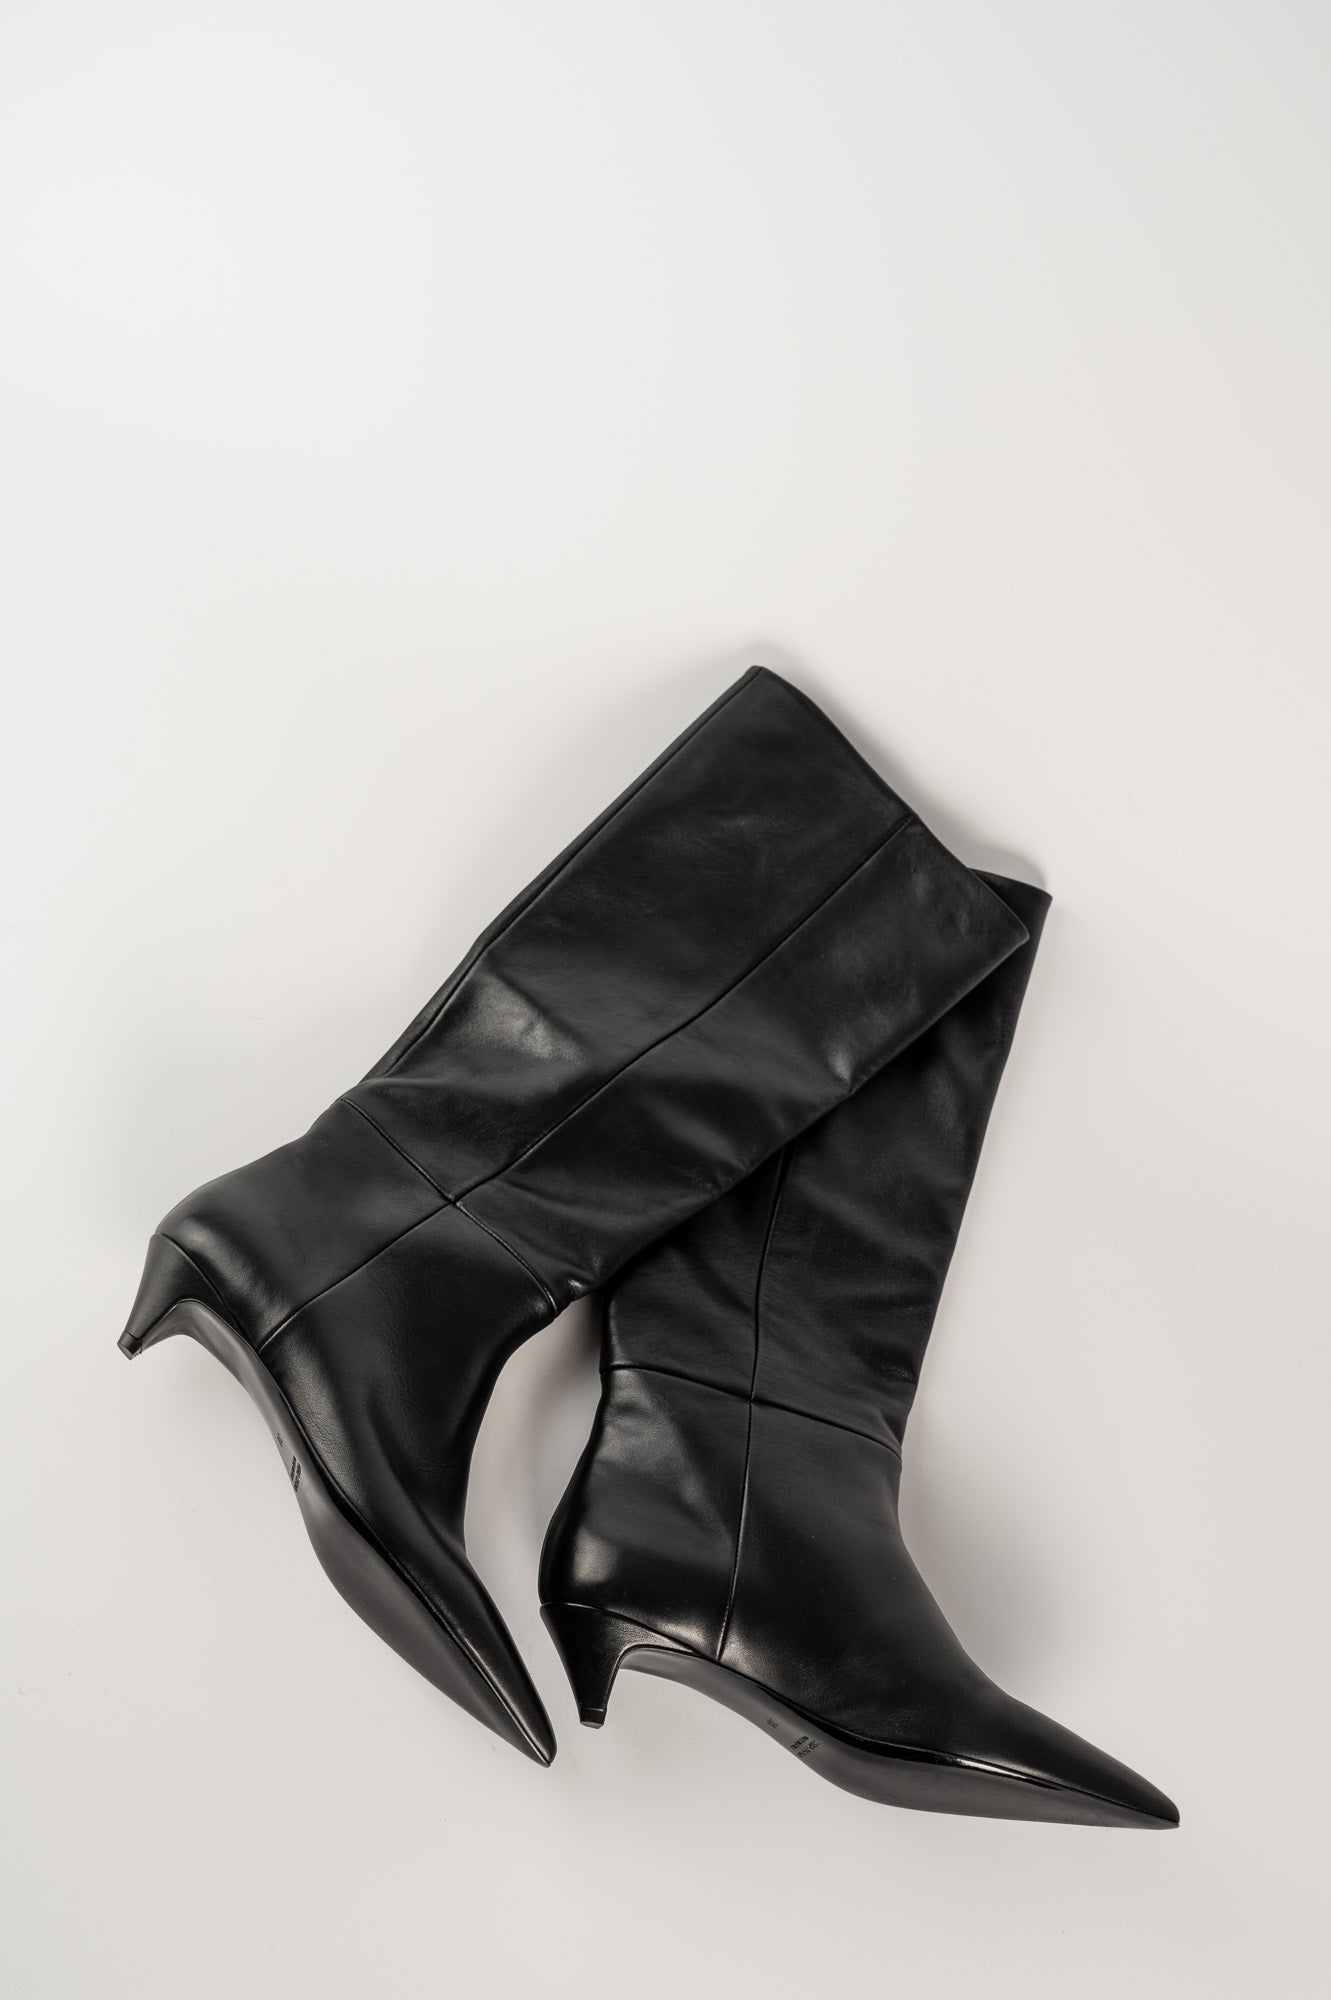 High Boot Palm 132 | Black Leather